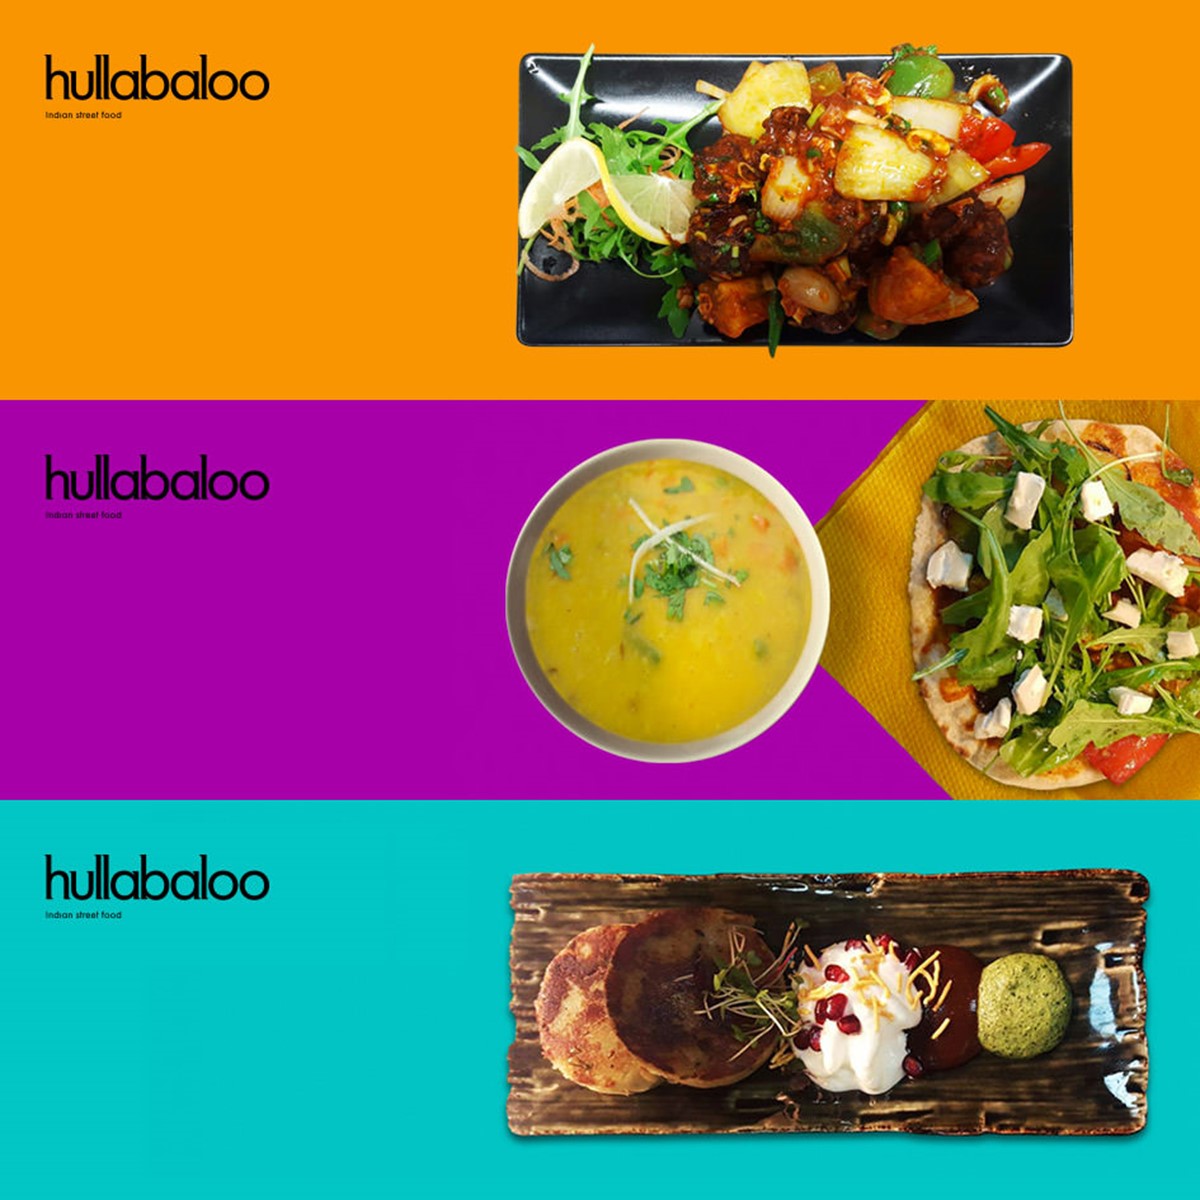 Hullabaloo. Indian Street Food. Social media banners. Brand identity design by Superfried.